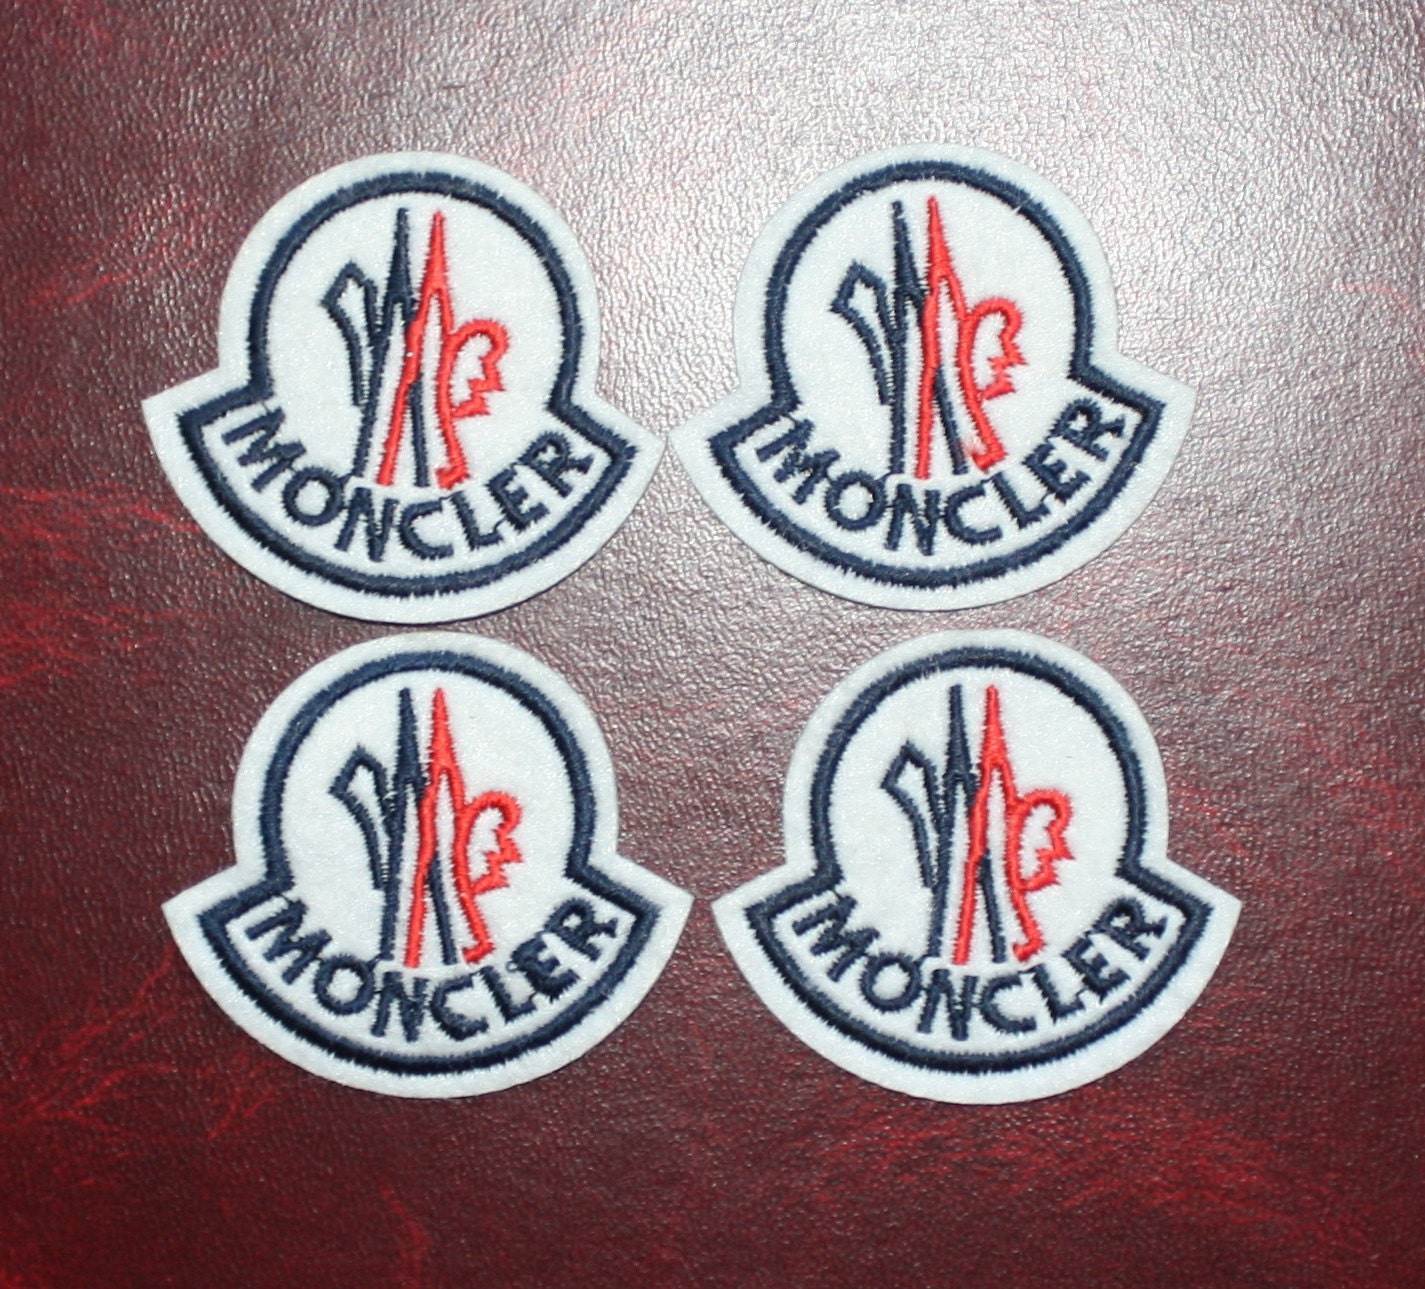 moncler logo patch for sale